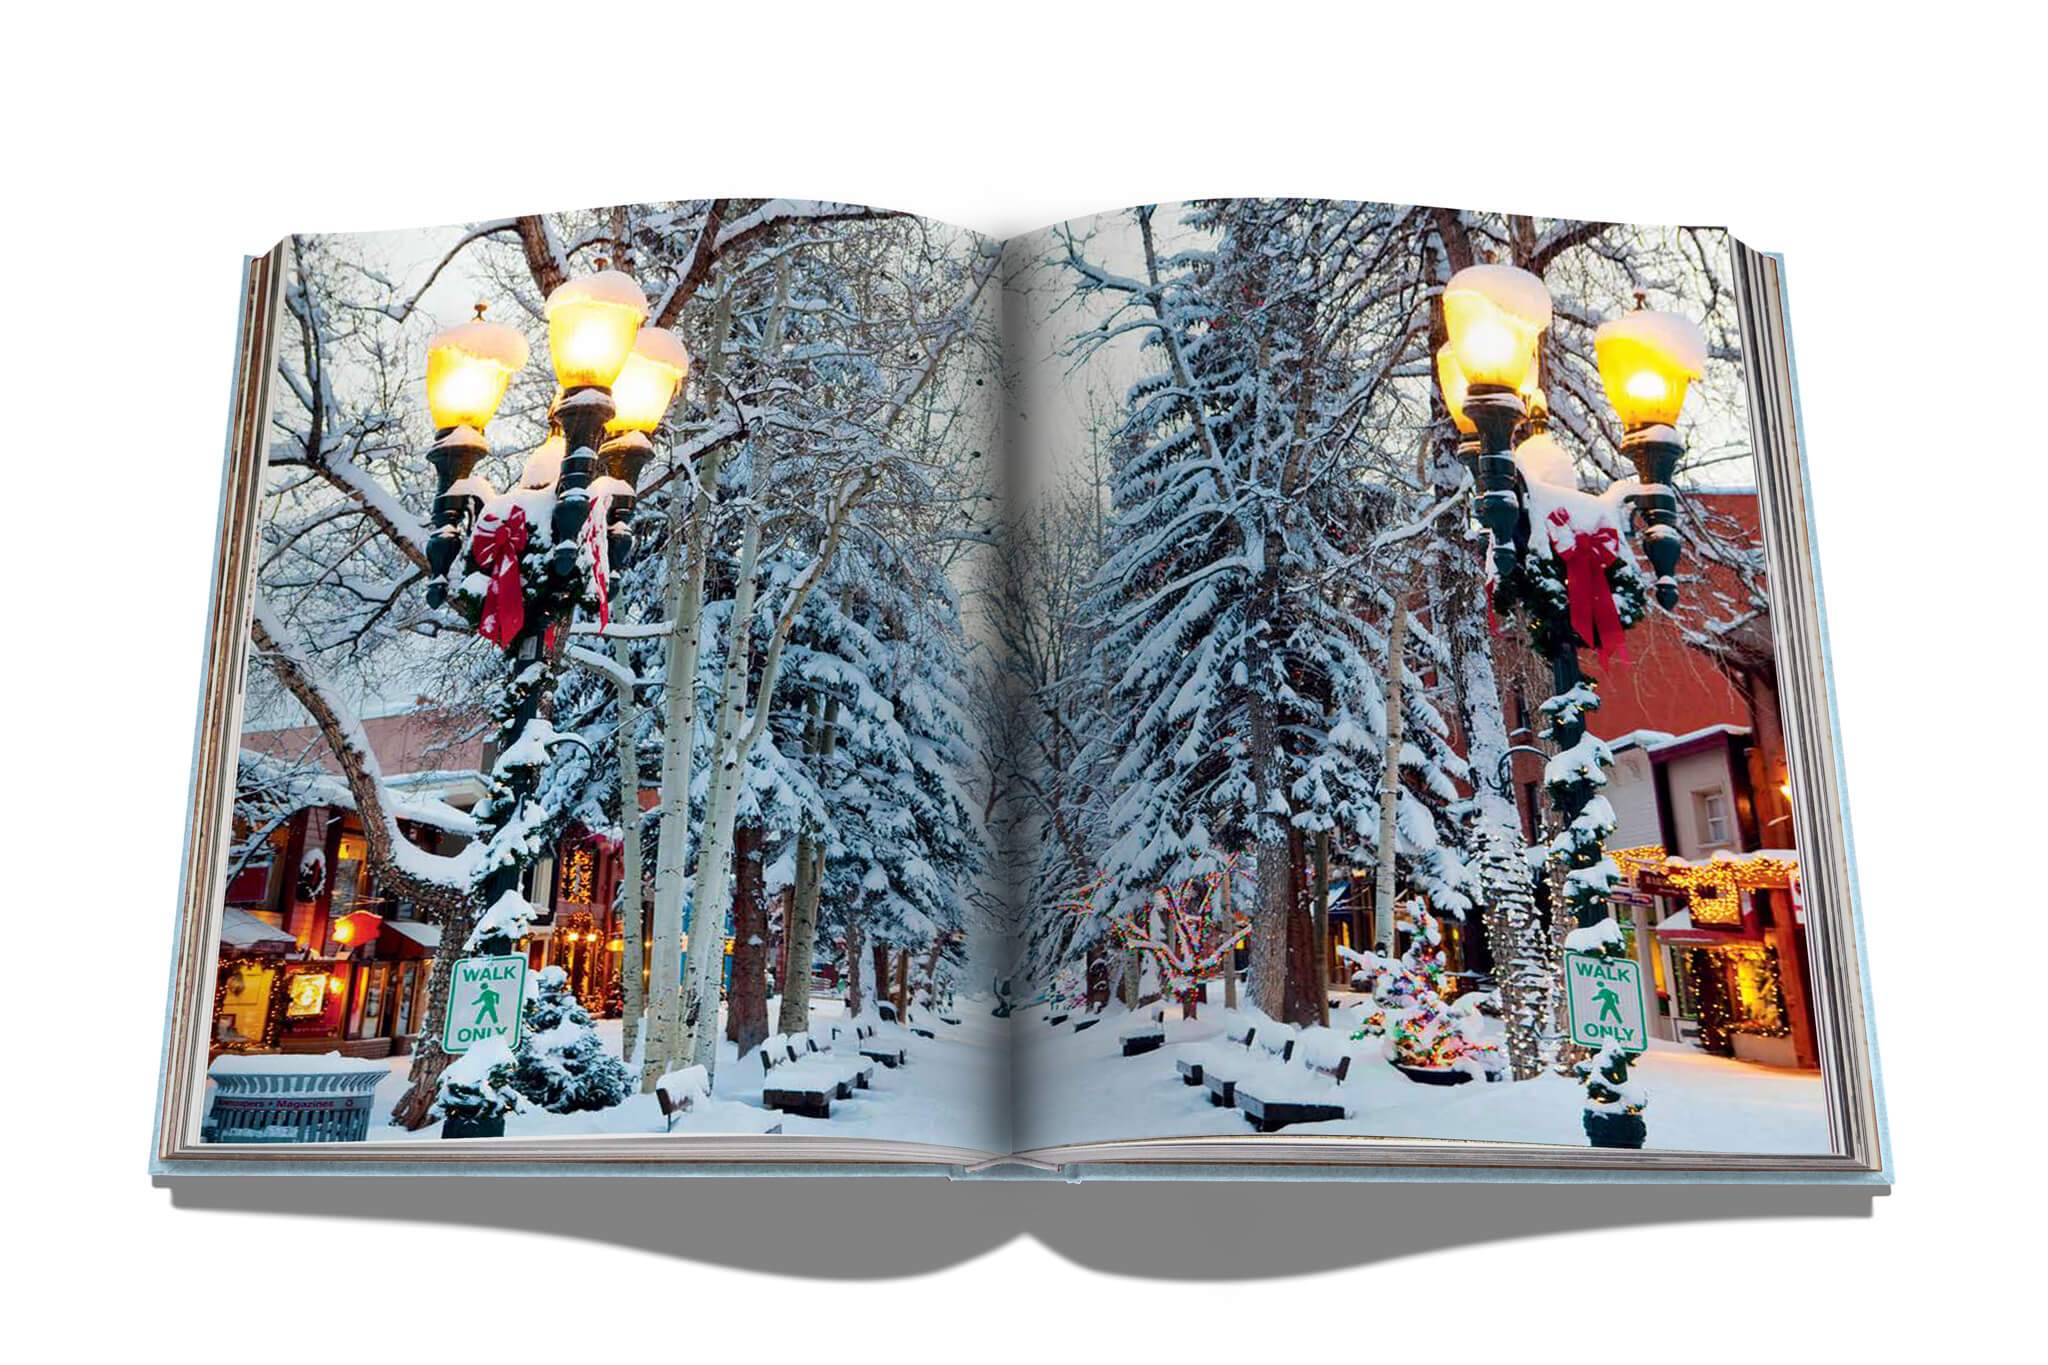 Assouline - Aspen Style - Coffee Table Book